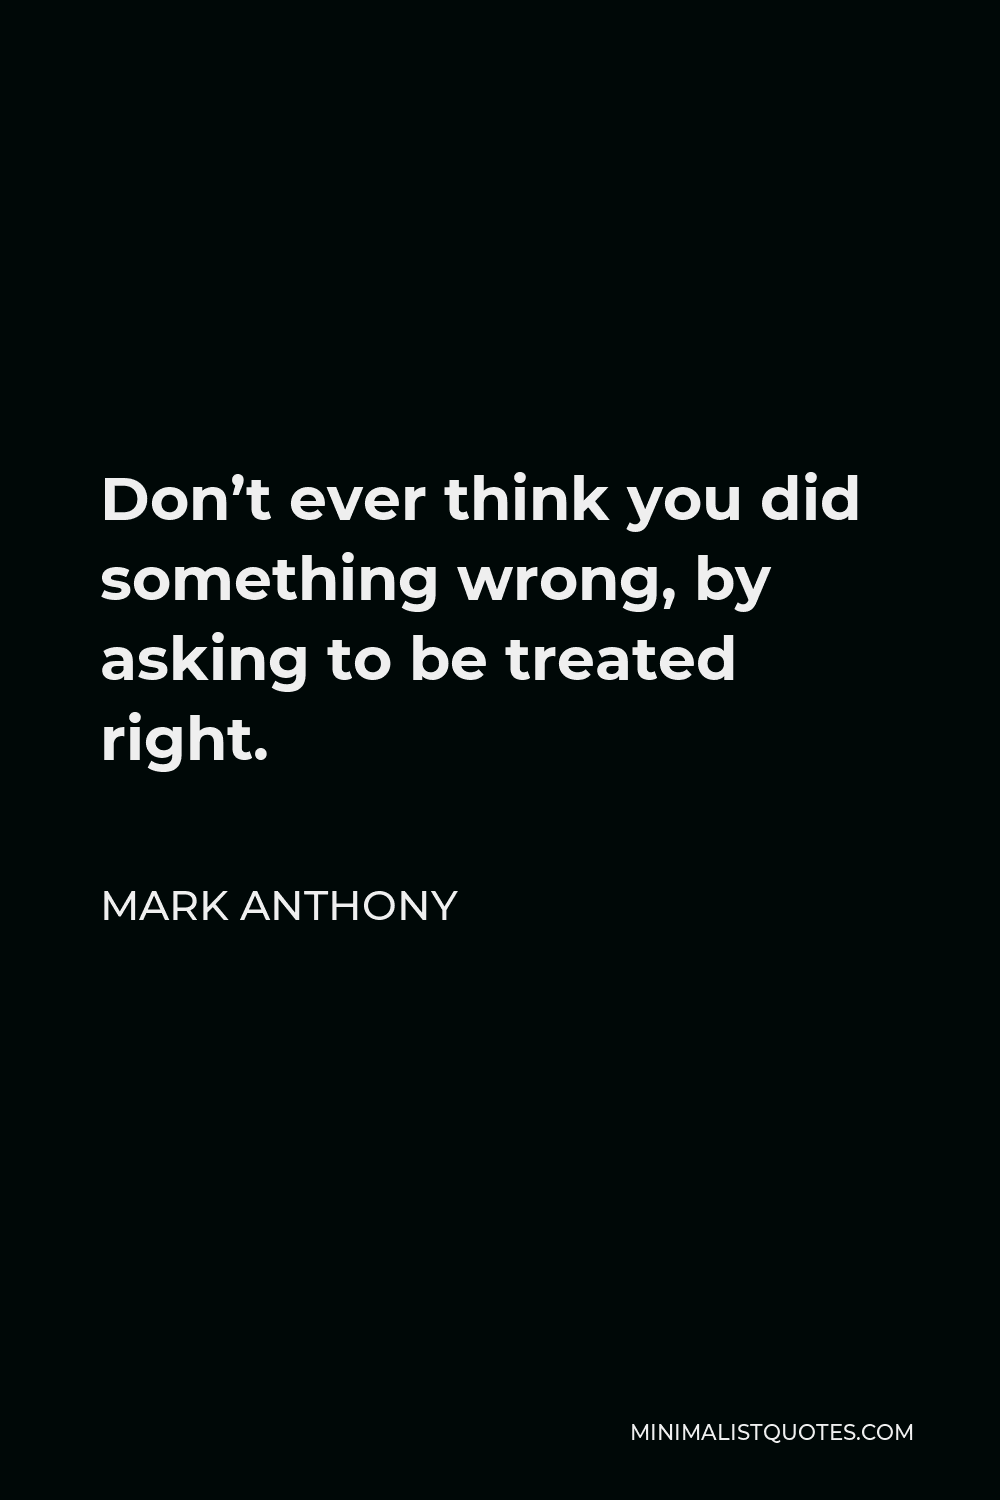 Mark Anthony Quote - Don’t ever think you did something wrong, by asking to be treated right.